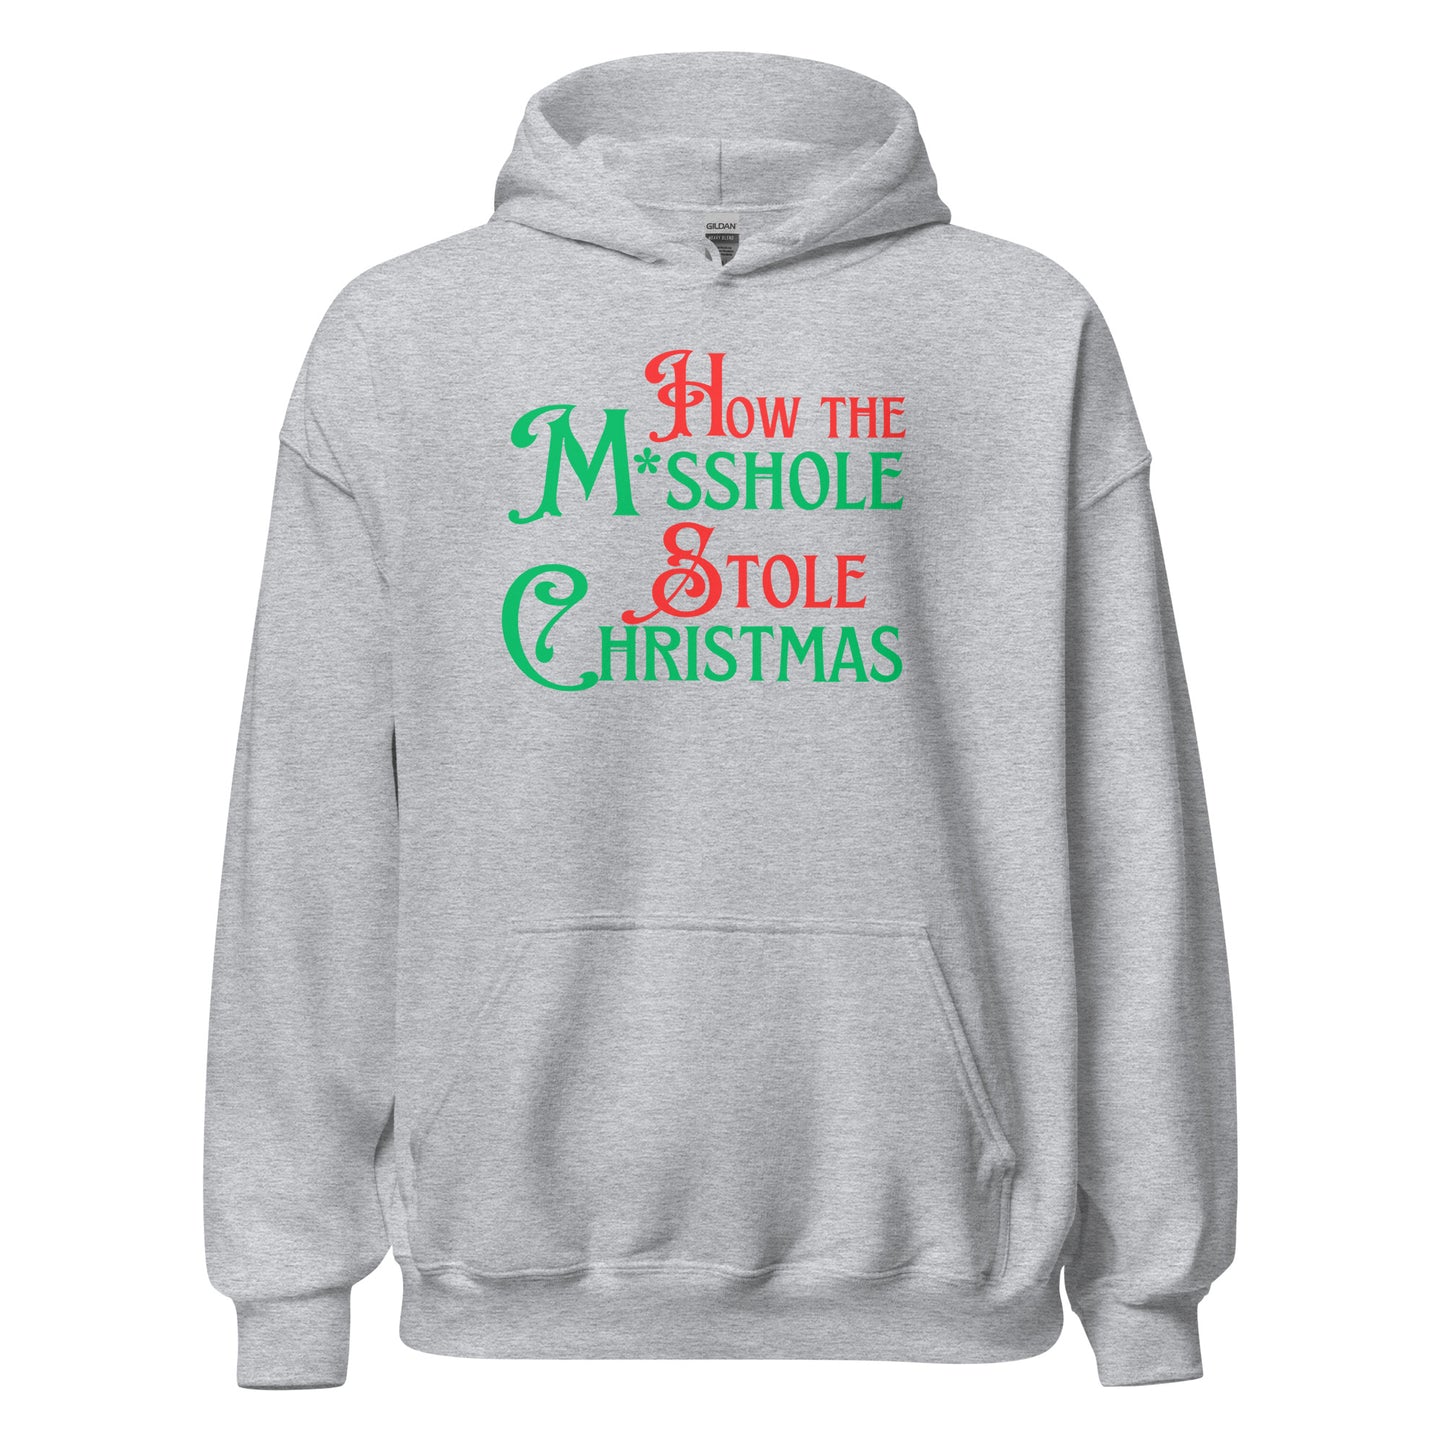 How the M*sshole Stole Christmas Hoodie